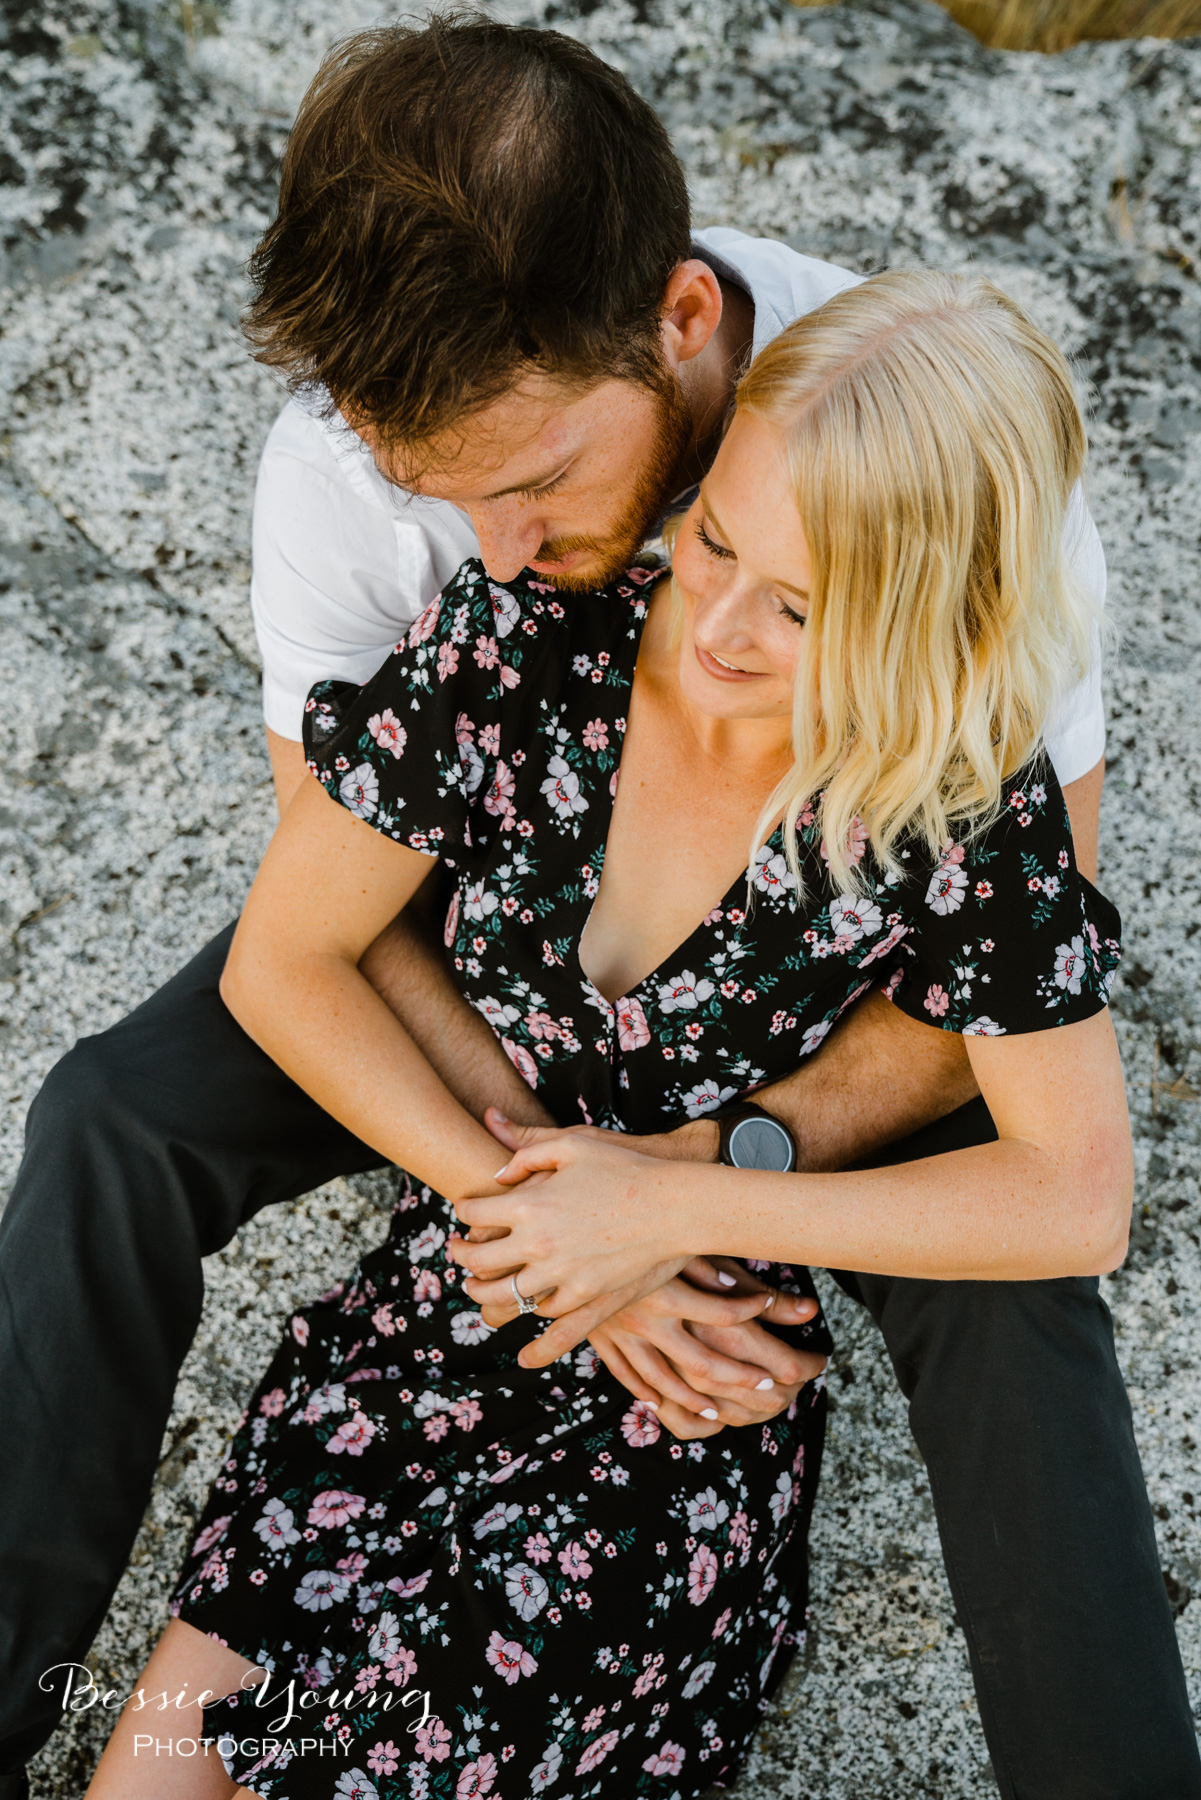 Mountain Engagement Photos Ideas by Bessie Young Photography